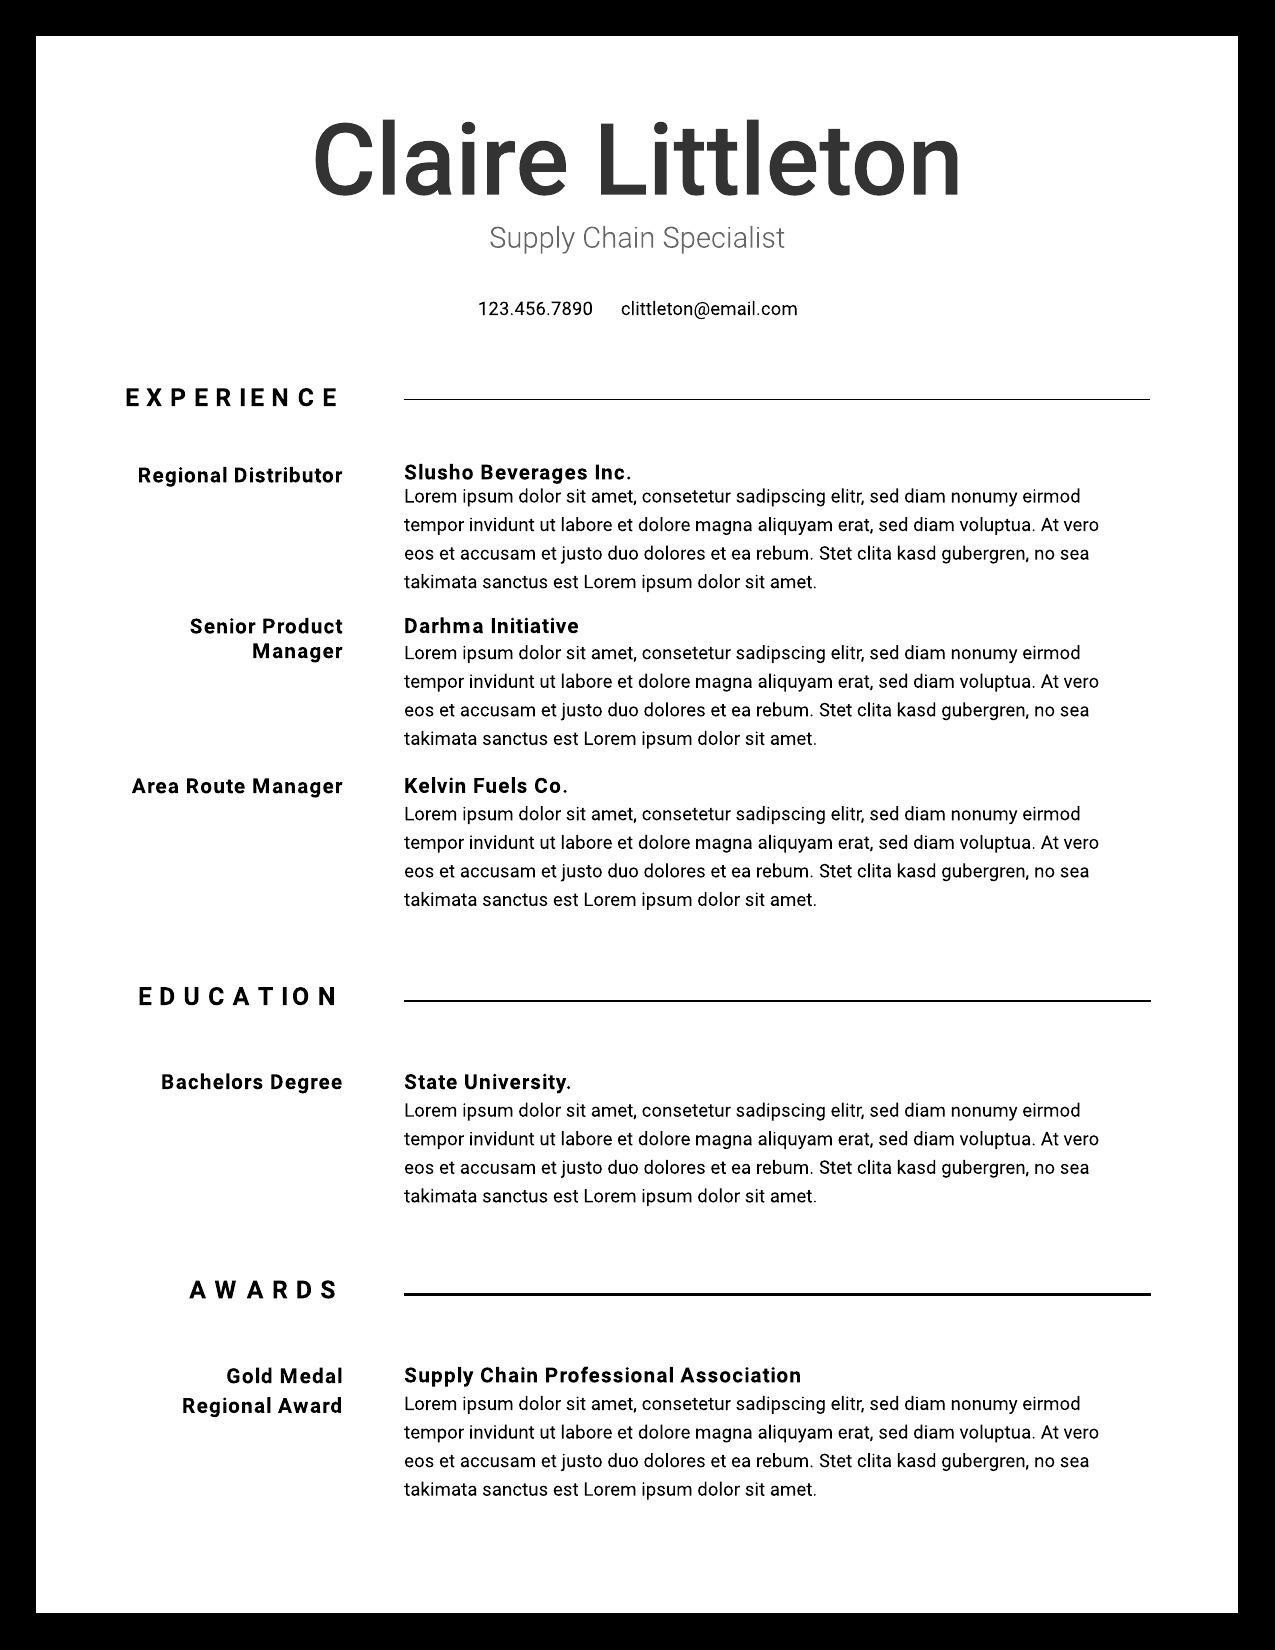 Sample Phrases and Suggestions for Resumes Resume Examples & Writing Tips for 2021 Lucidpress